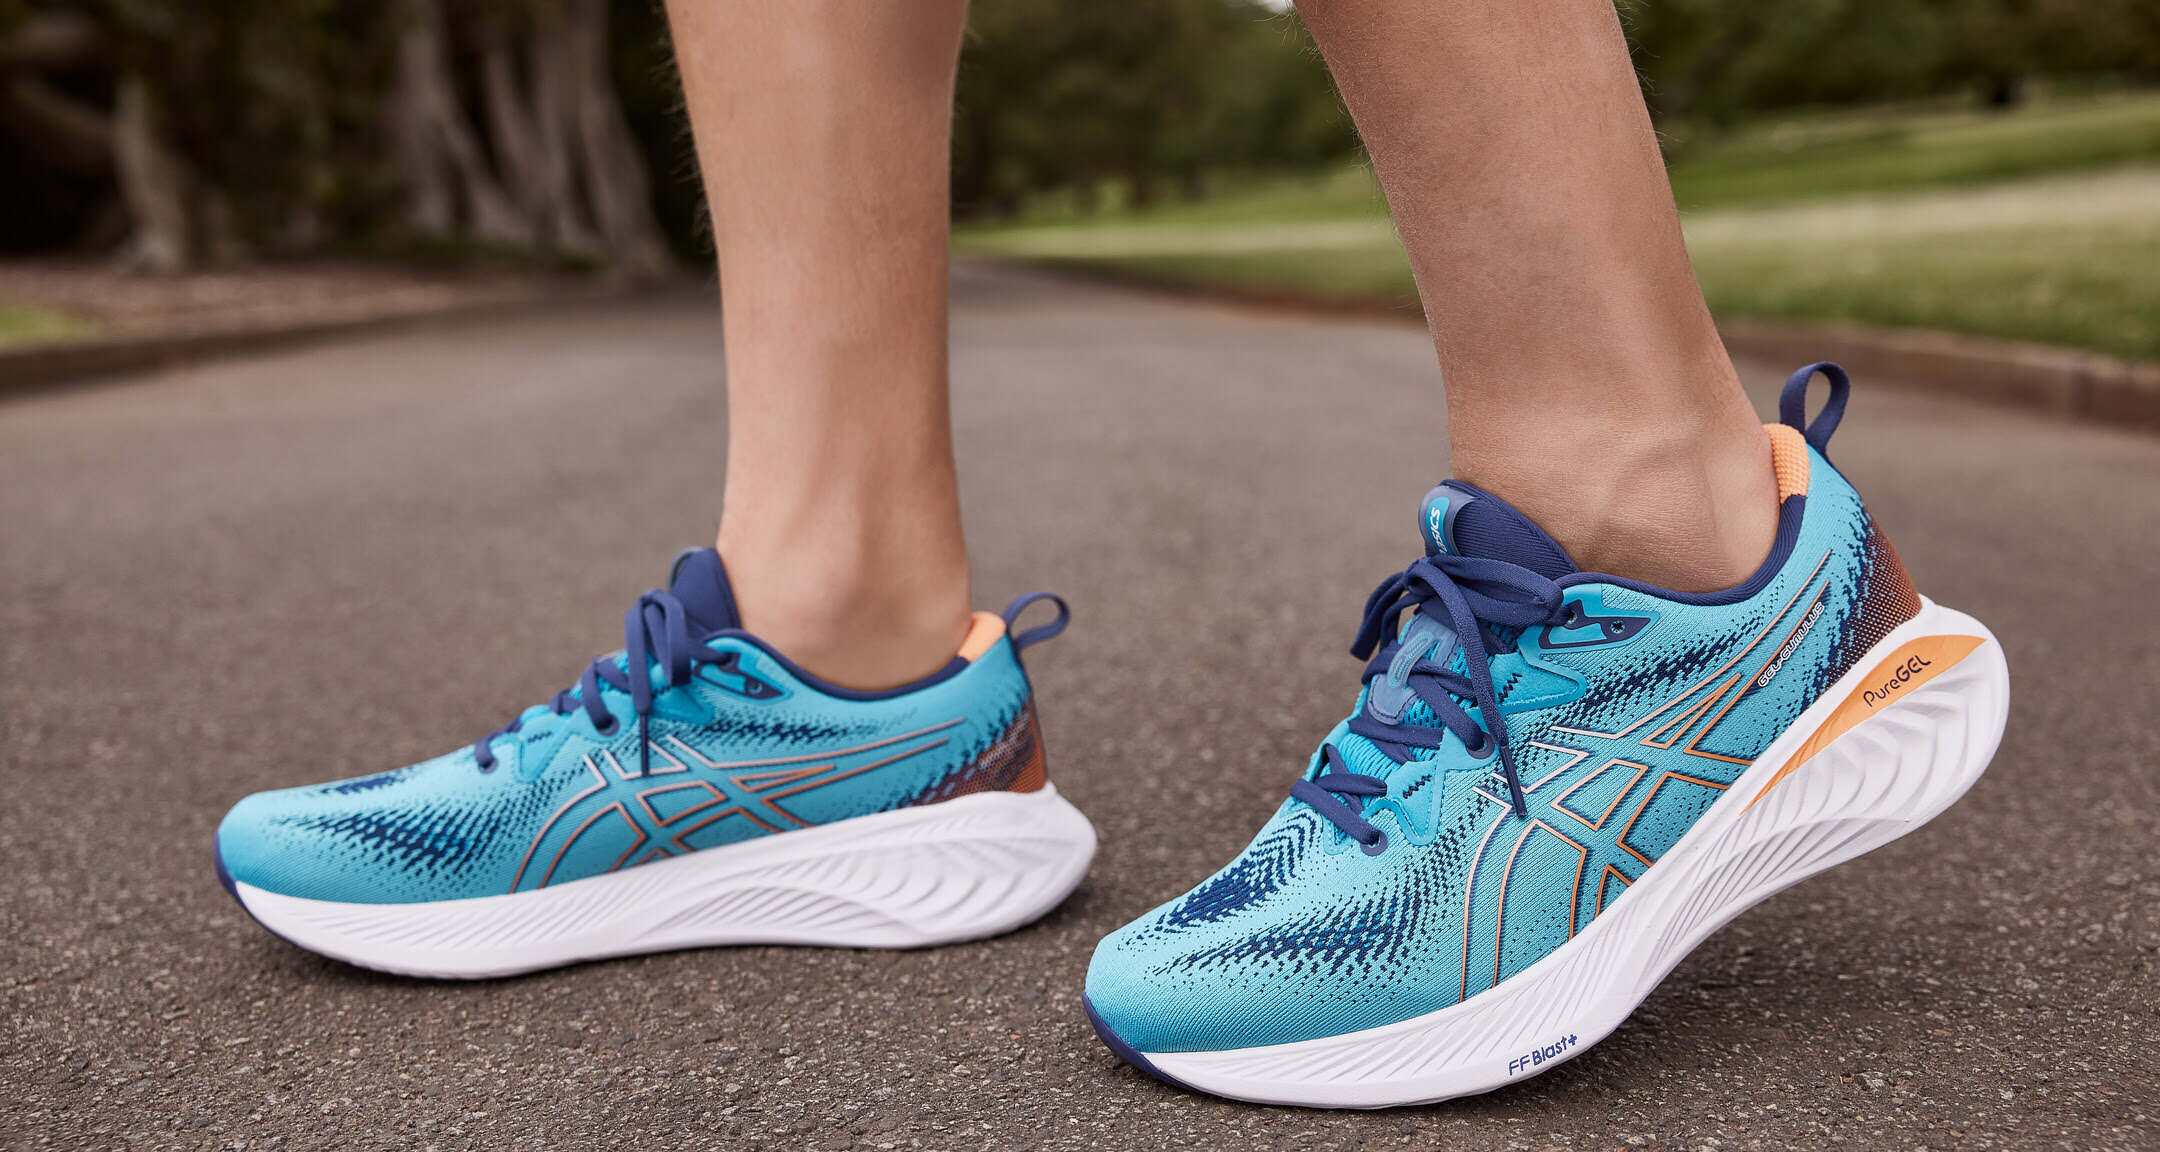 best running shoes for wide feet